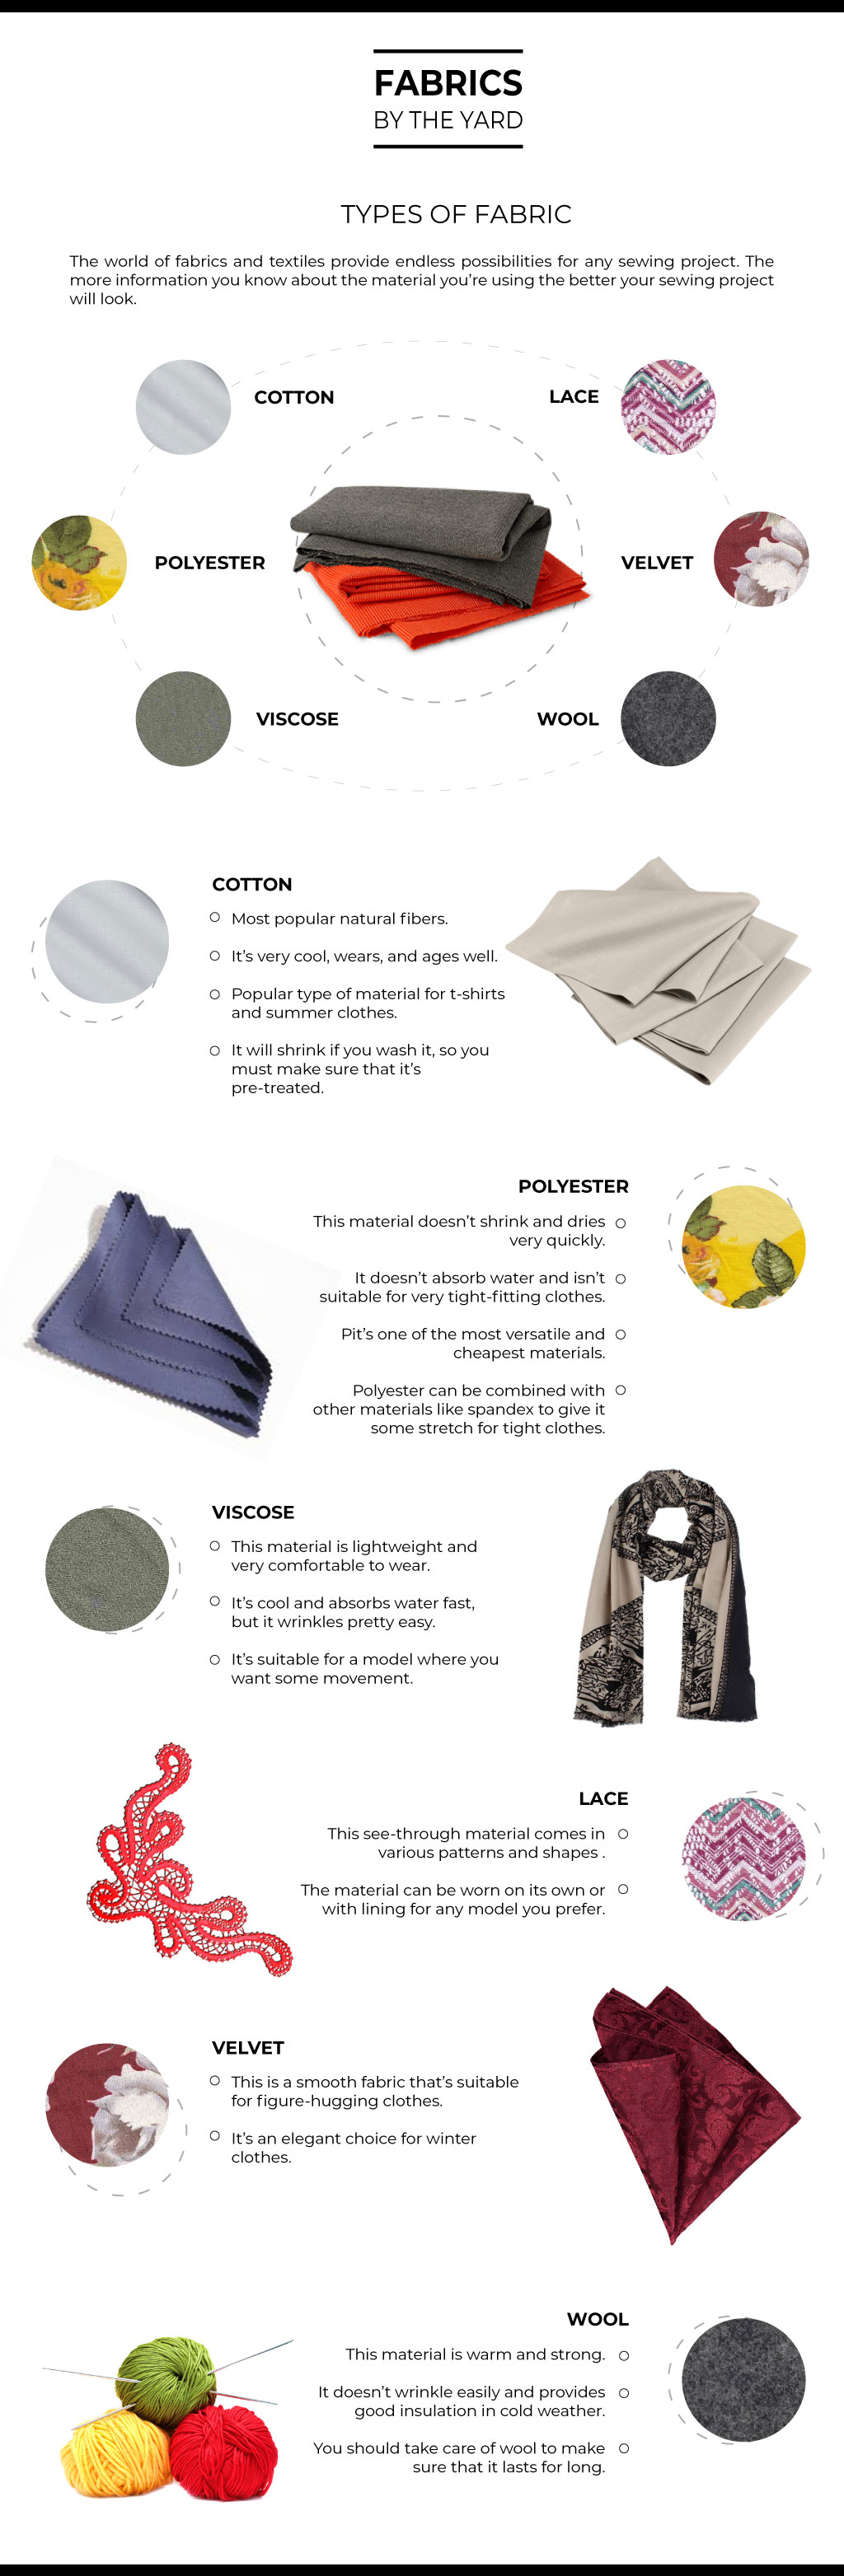 How to Choose the Right Fabric for my Sewing Project